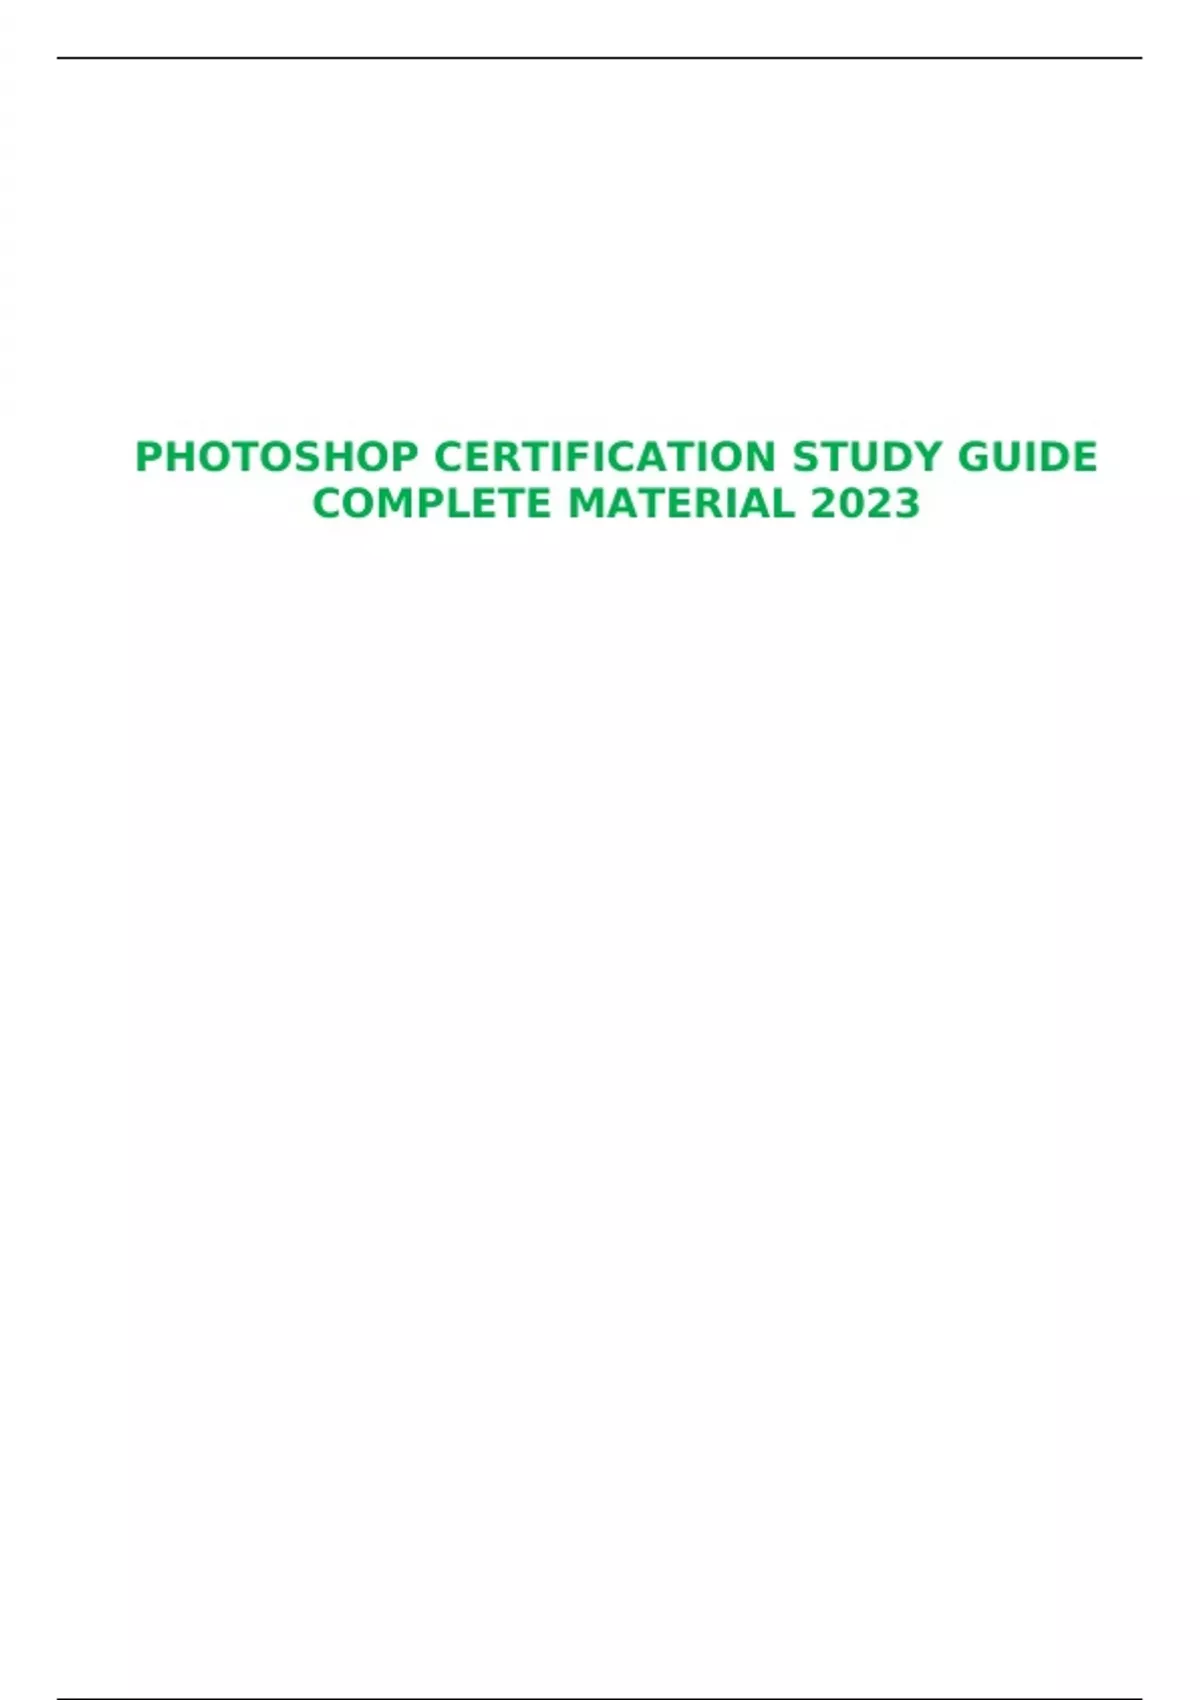 photoshop certification study guide